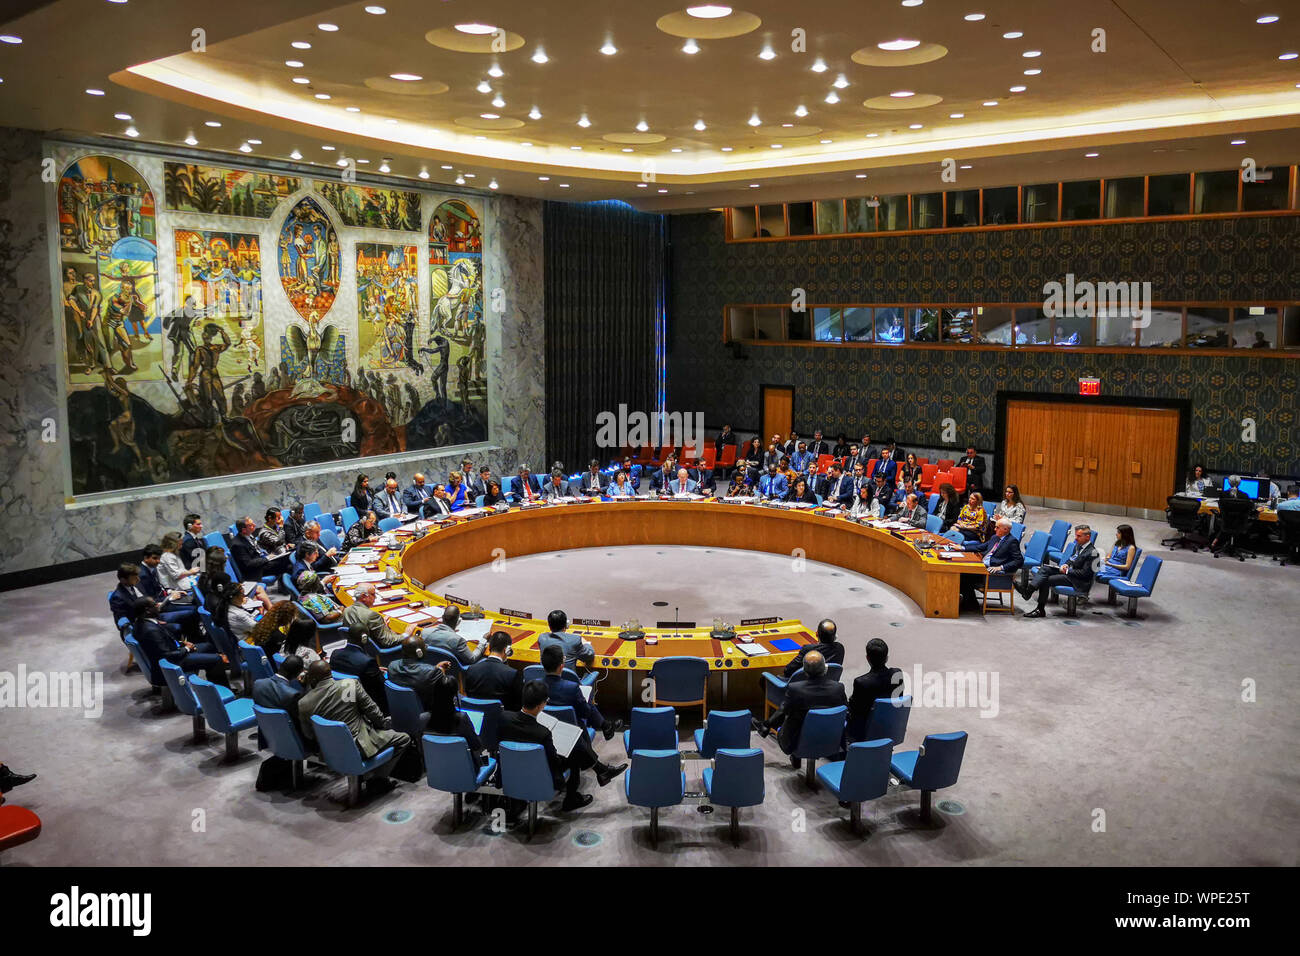 Beijing, China. 26th June, 2019. Photo taken on June 26, 2019 shows the United Nations Security Council's semi-annual briefing on the implementation of Resolution 2231, which endorsed the Joint Comprehensive Plan of Action (JCPOA) on Iran's nuclear program, at the UN headquarters in New York. Credit: Li Muzi/Xinhua/Alamy Live News Stock Photo